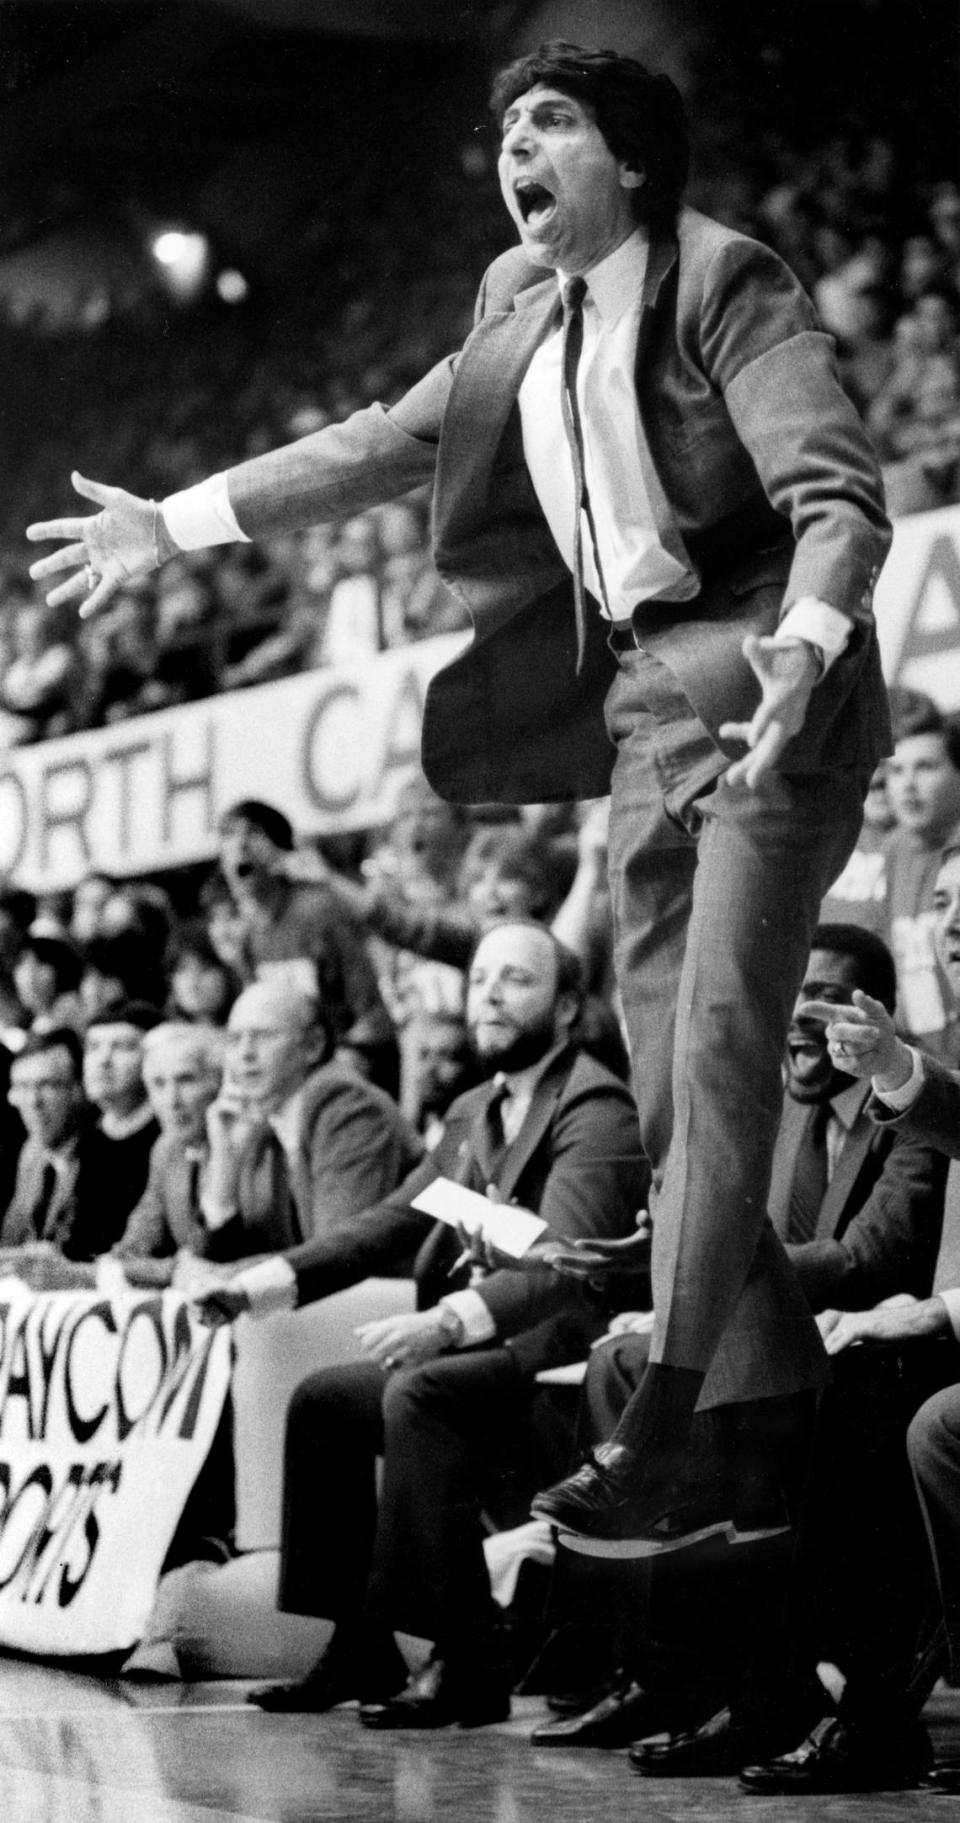 NC State coach Jim Valvano leaps off the floor during the Wolfpack’s 85-76 victory over the rival Tar Heels of North Carolina on Feb. 17, 1985.